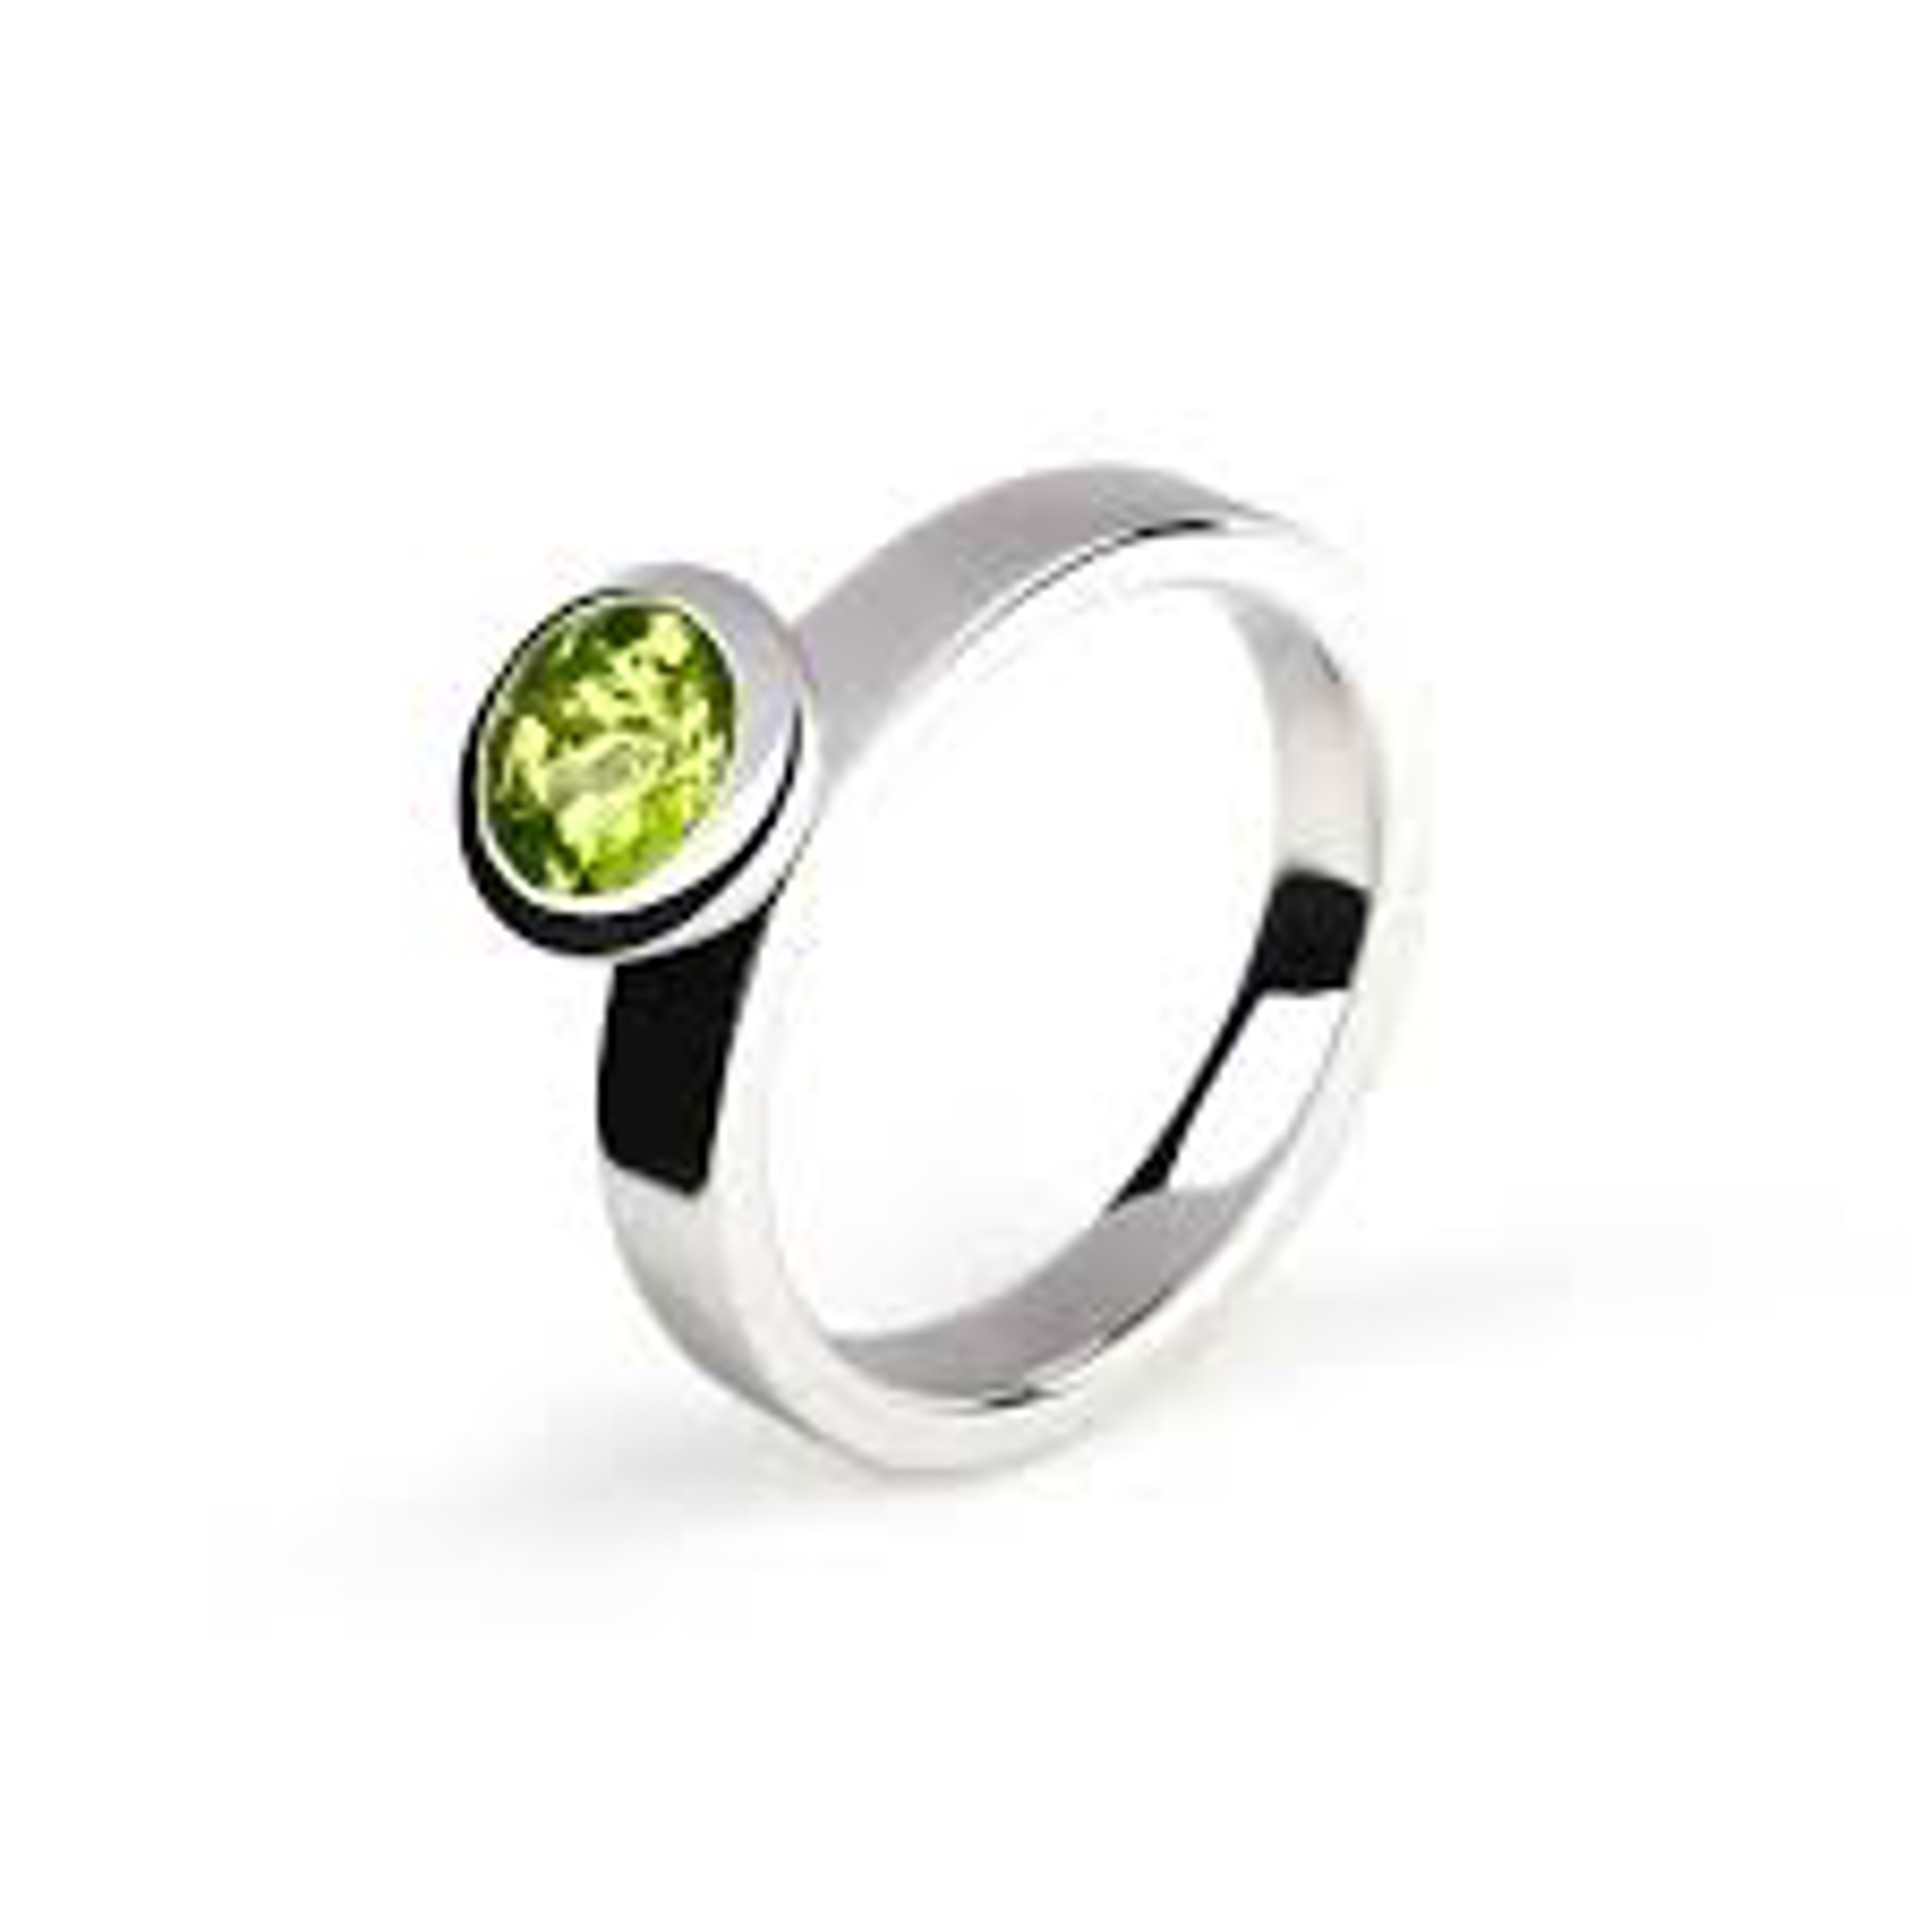 Ring-Stackable Sterling Silver with Peridot /size 7 by Joryel Vera